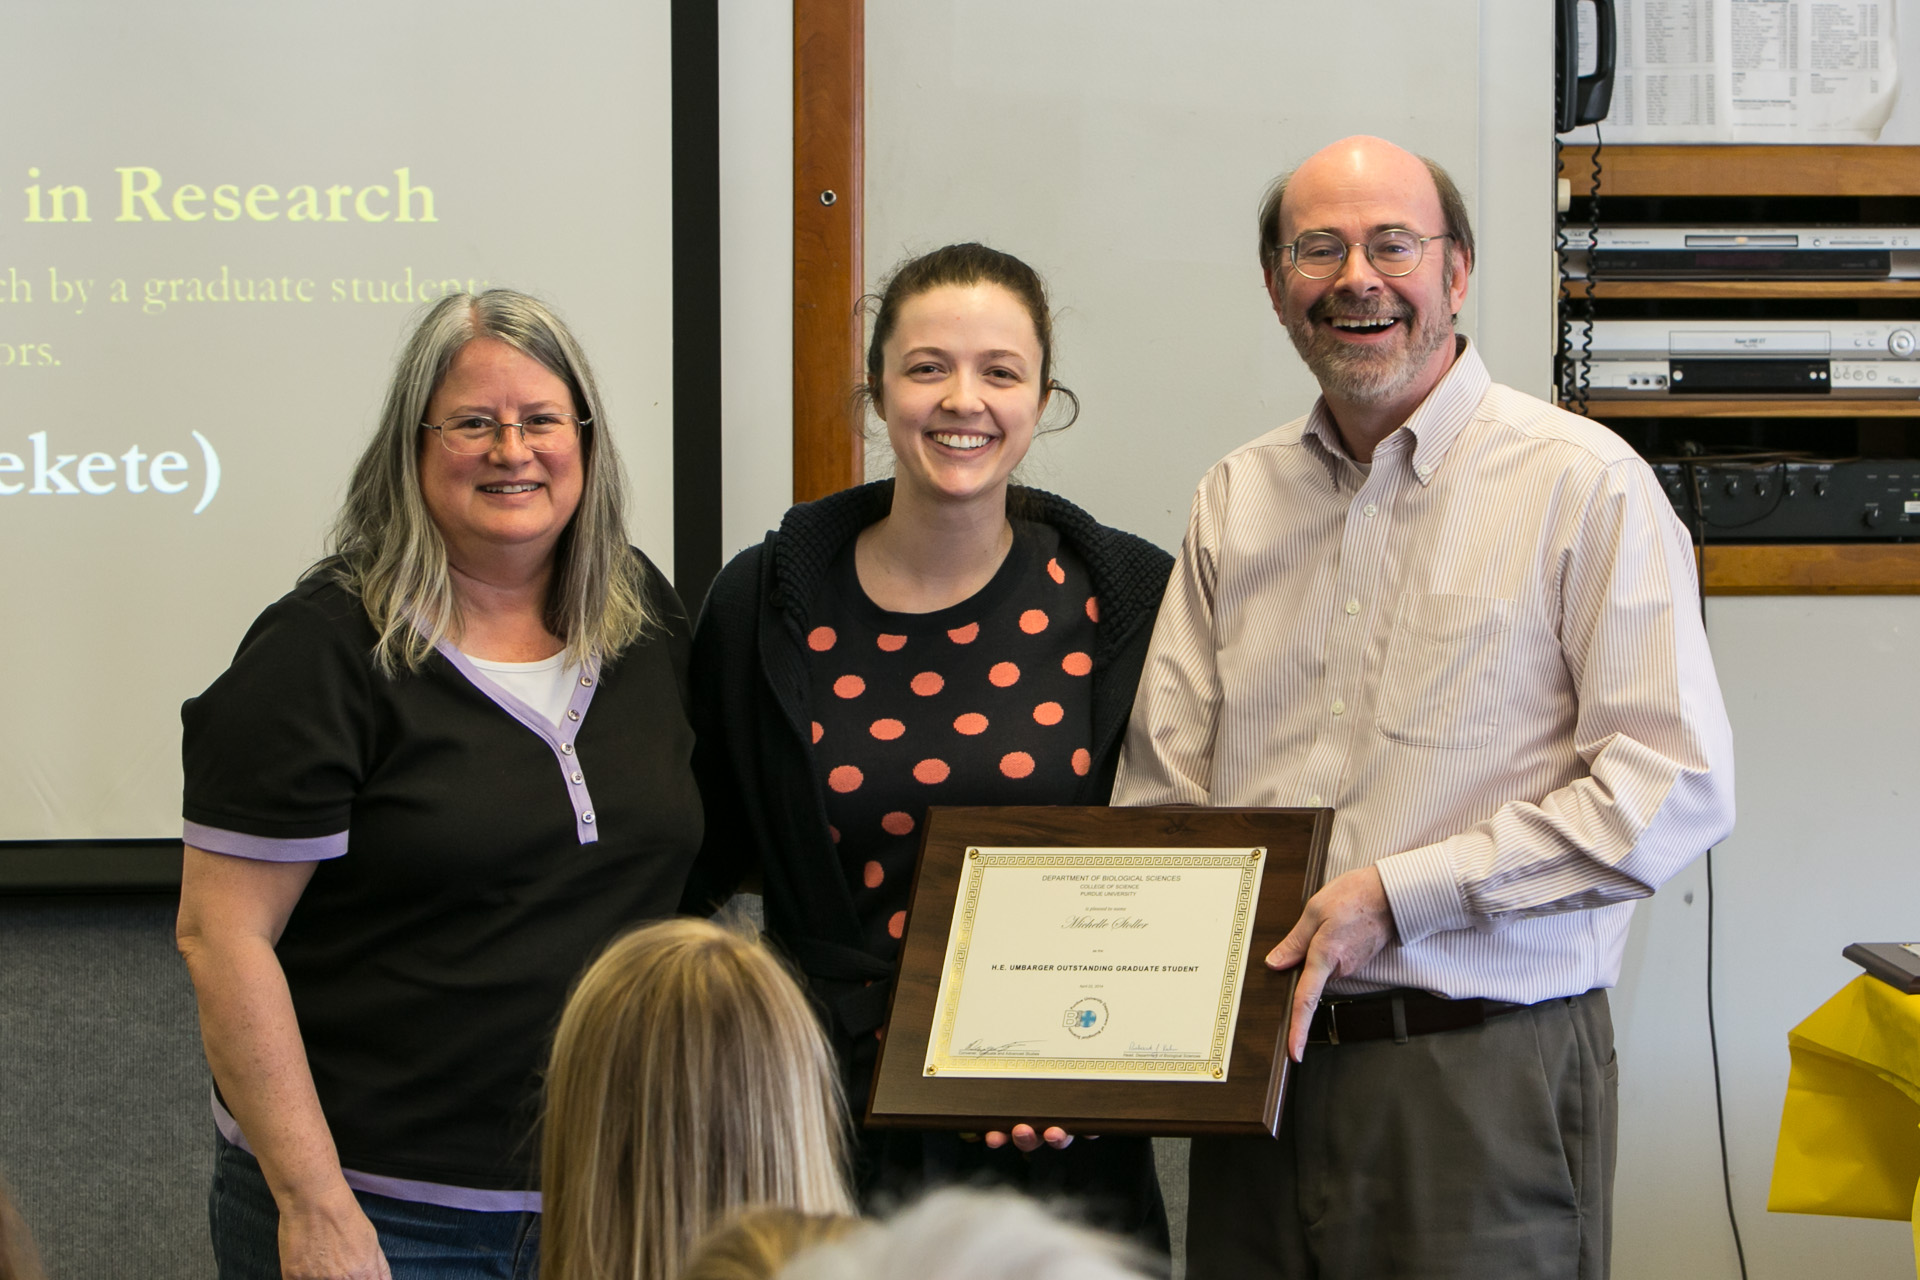 Michelle Stoller (Fekete Lab) was the recipient of the H.E. Umbarger Outstanding Graduate Student in Research Award.